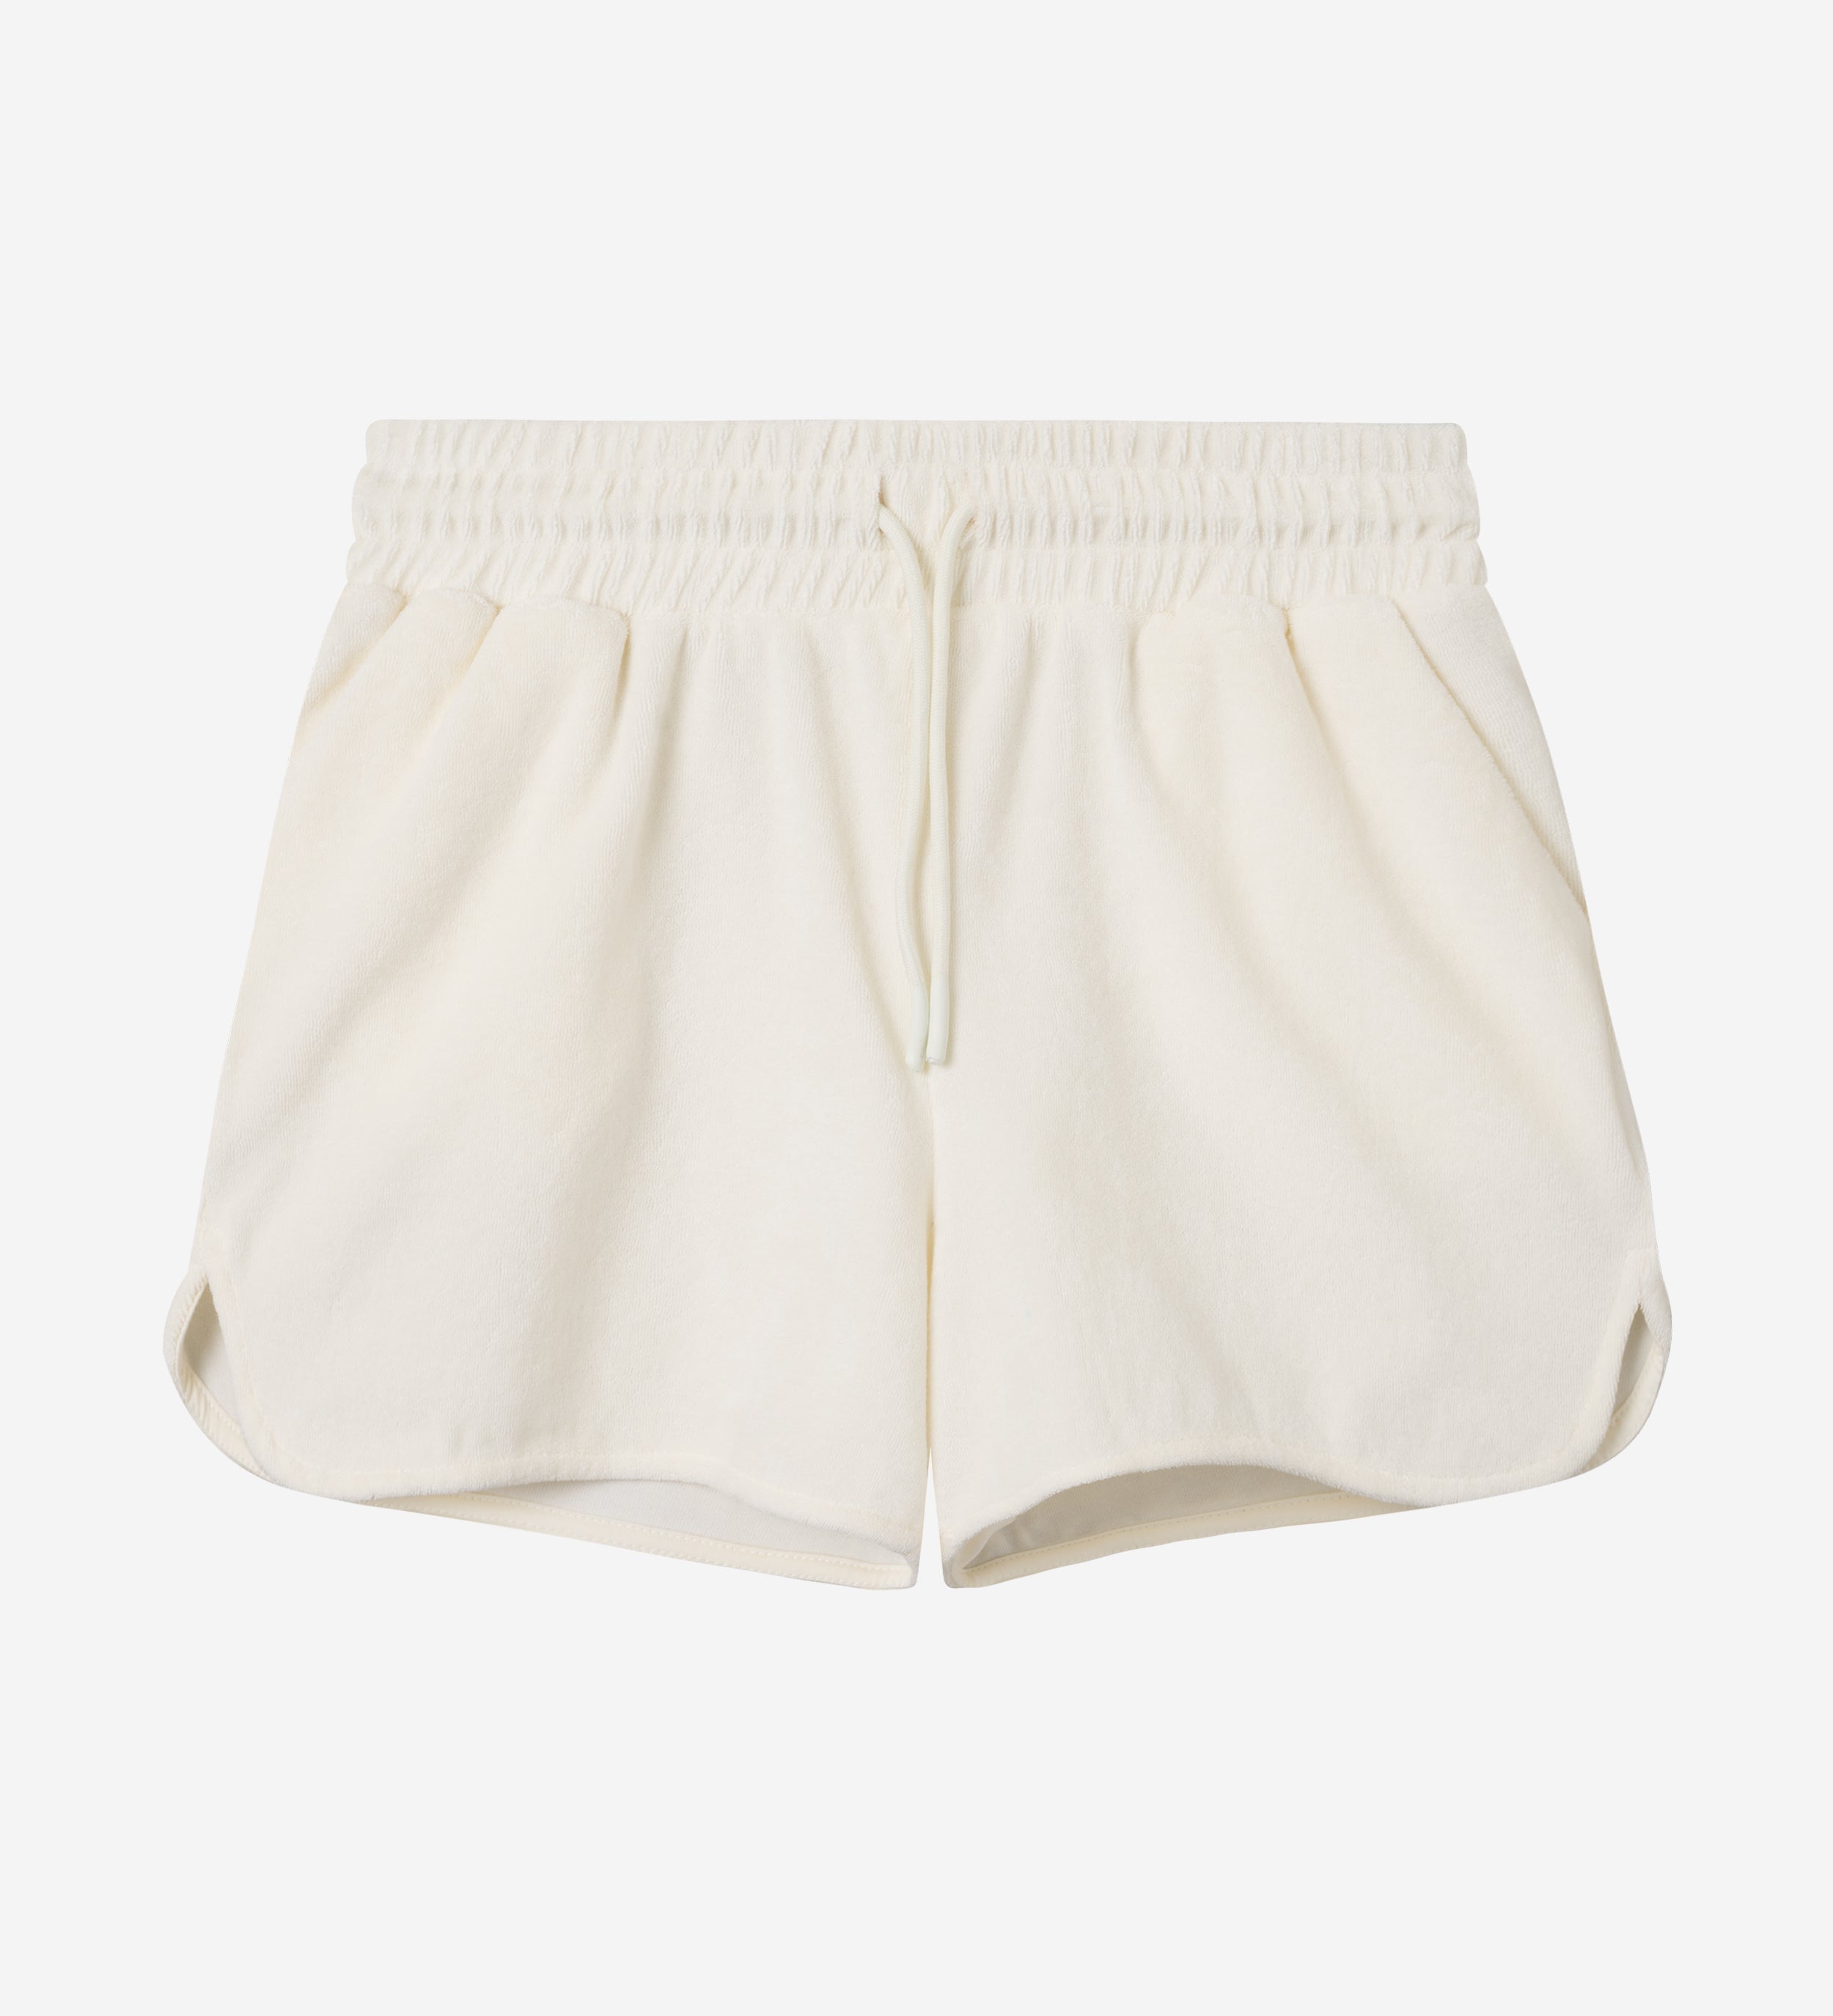 Off white low cut shorts in terry toweling fabric with drawstring and two side pockets.